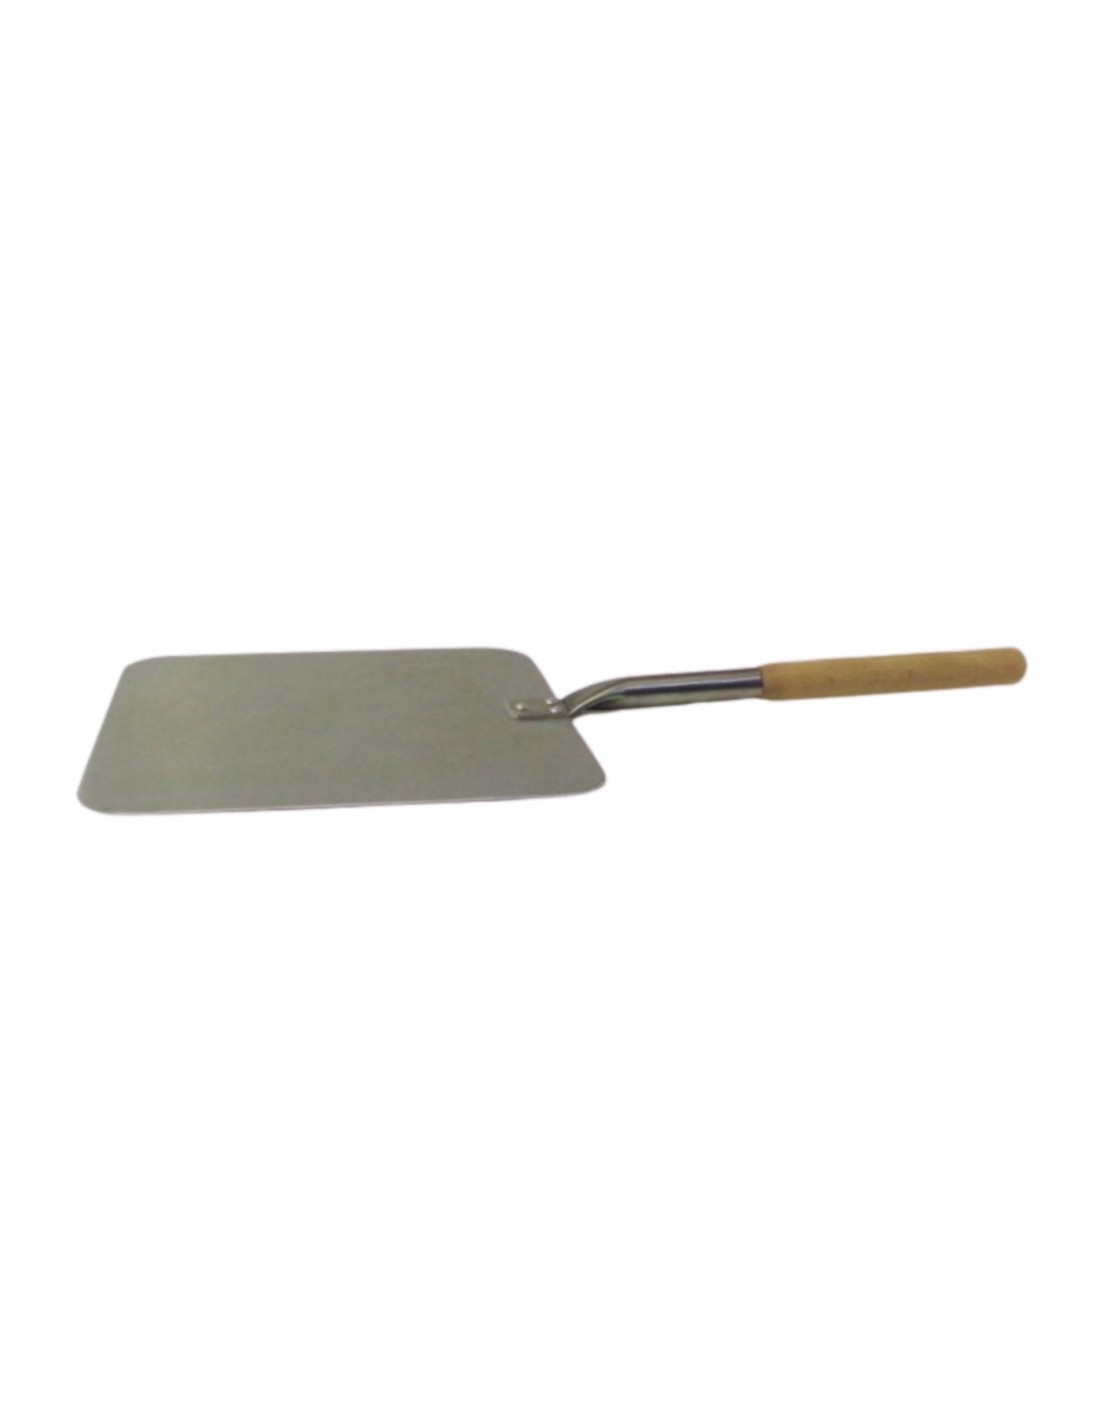 Square pizza shovel - In aluminum with stainless steel handle and wooden grip - Dimensions 28 x 28 x 58 h cm